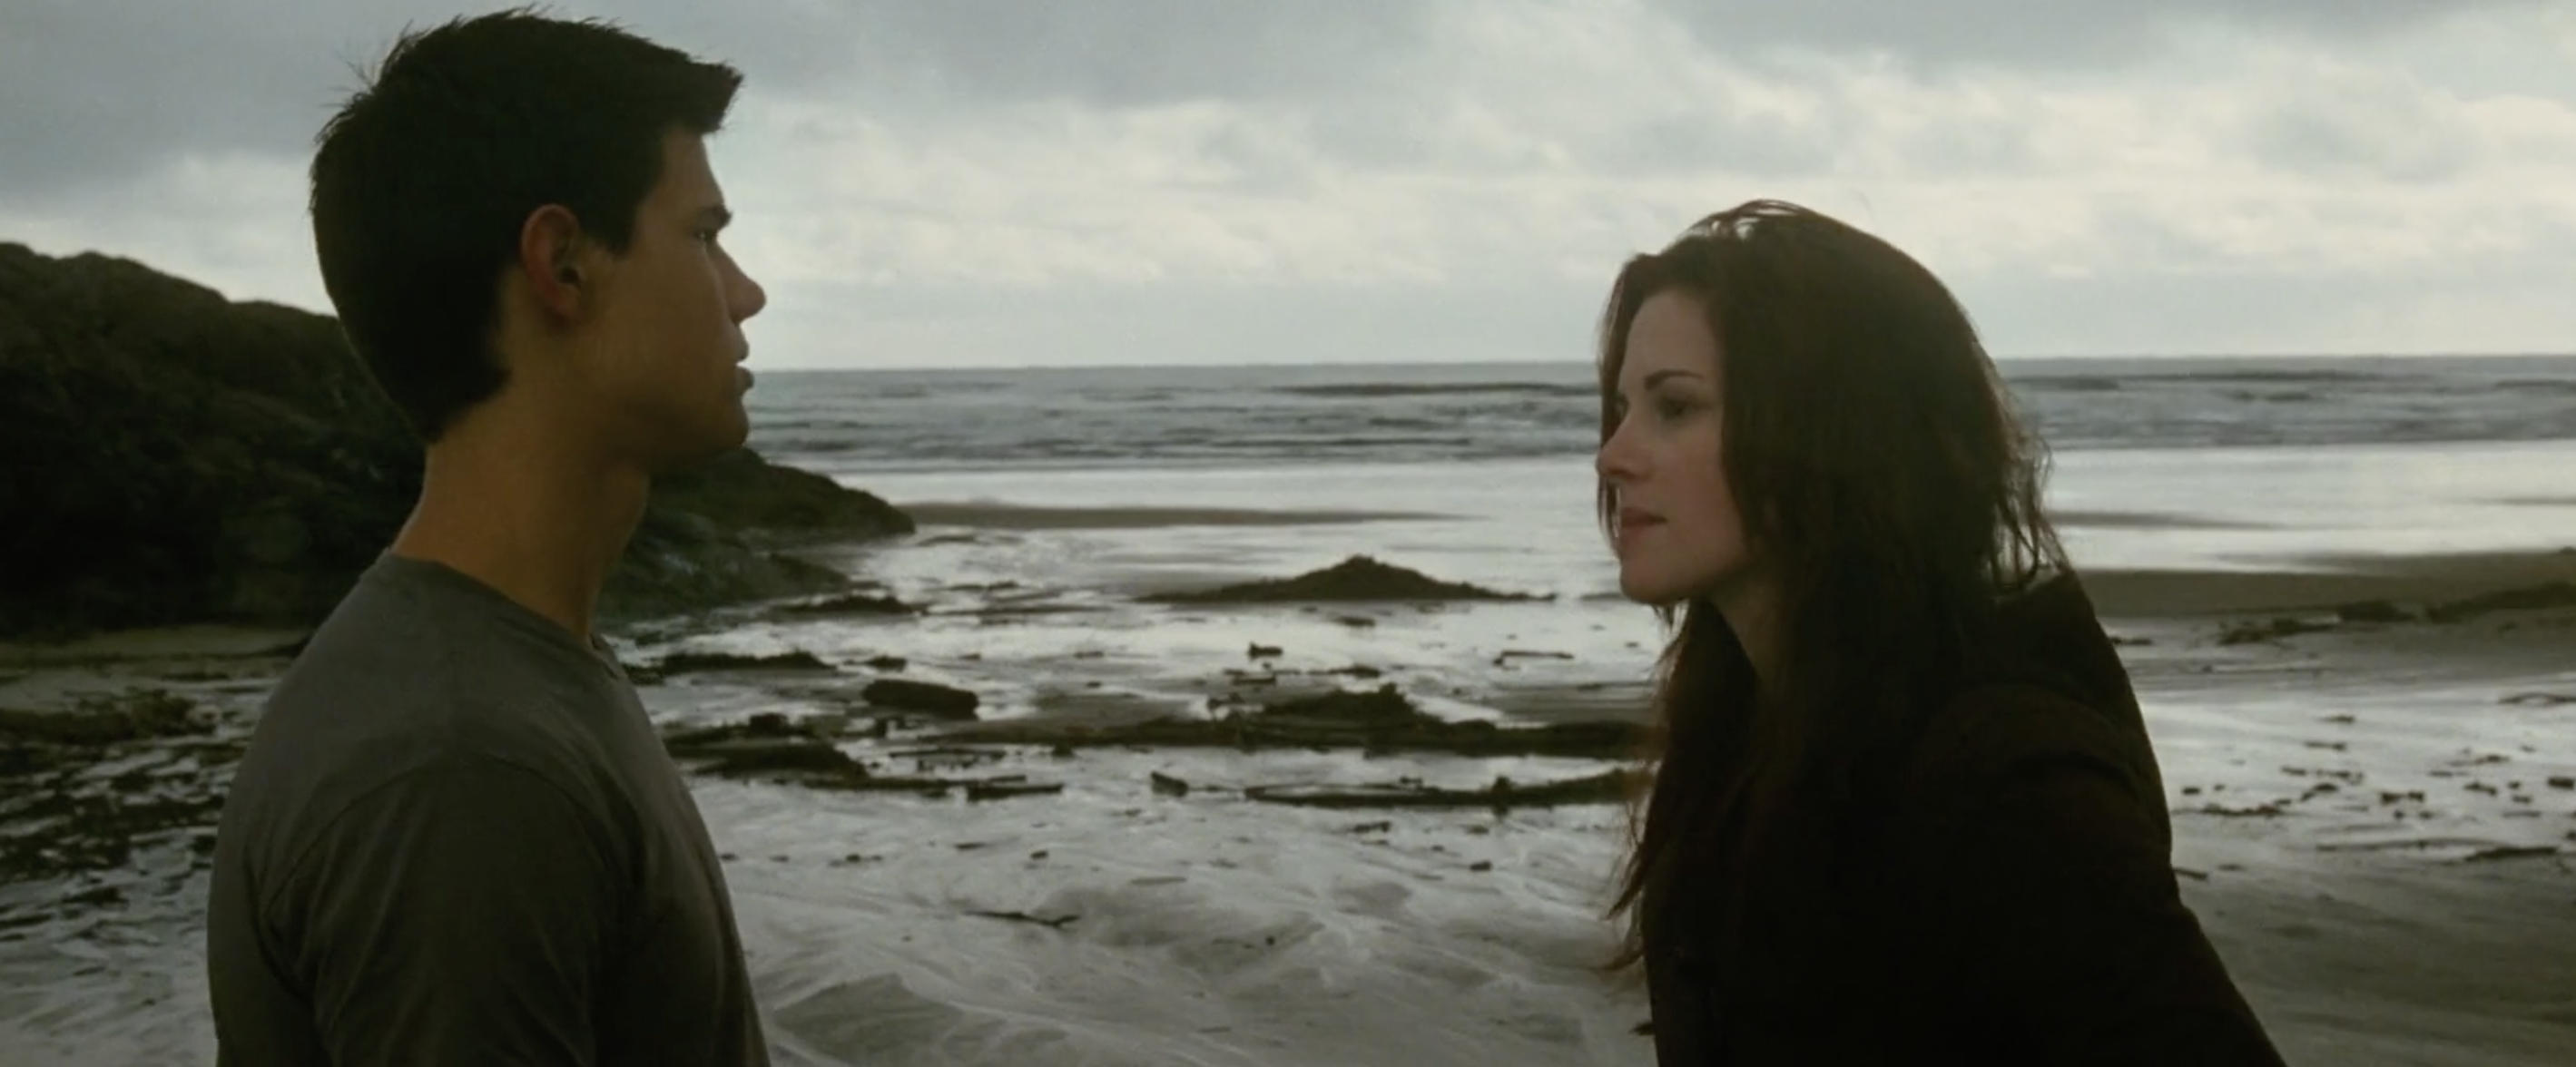 screenshot of Twilight movie location. Credit to Summit Entertainment. Image used for critique.